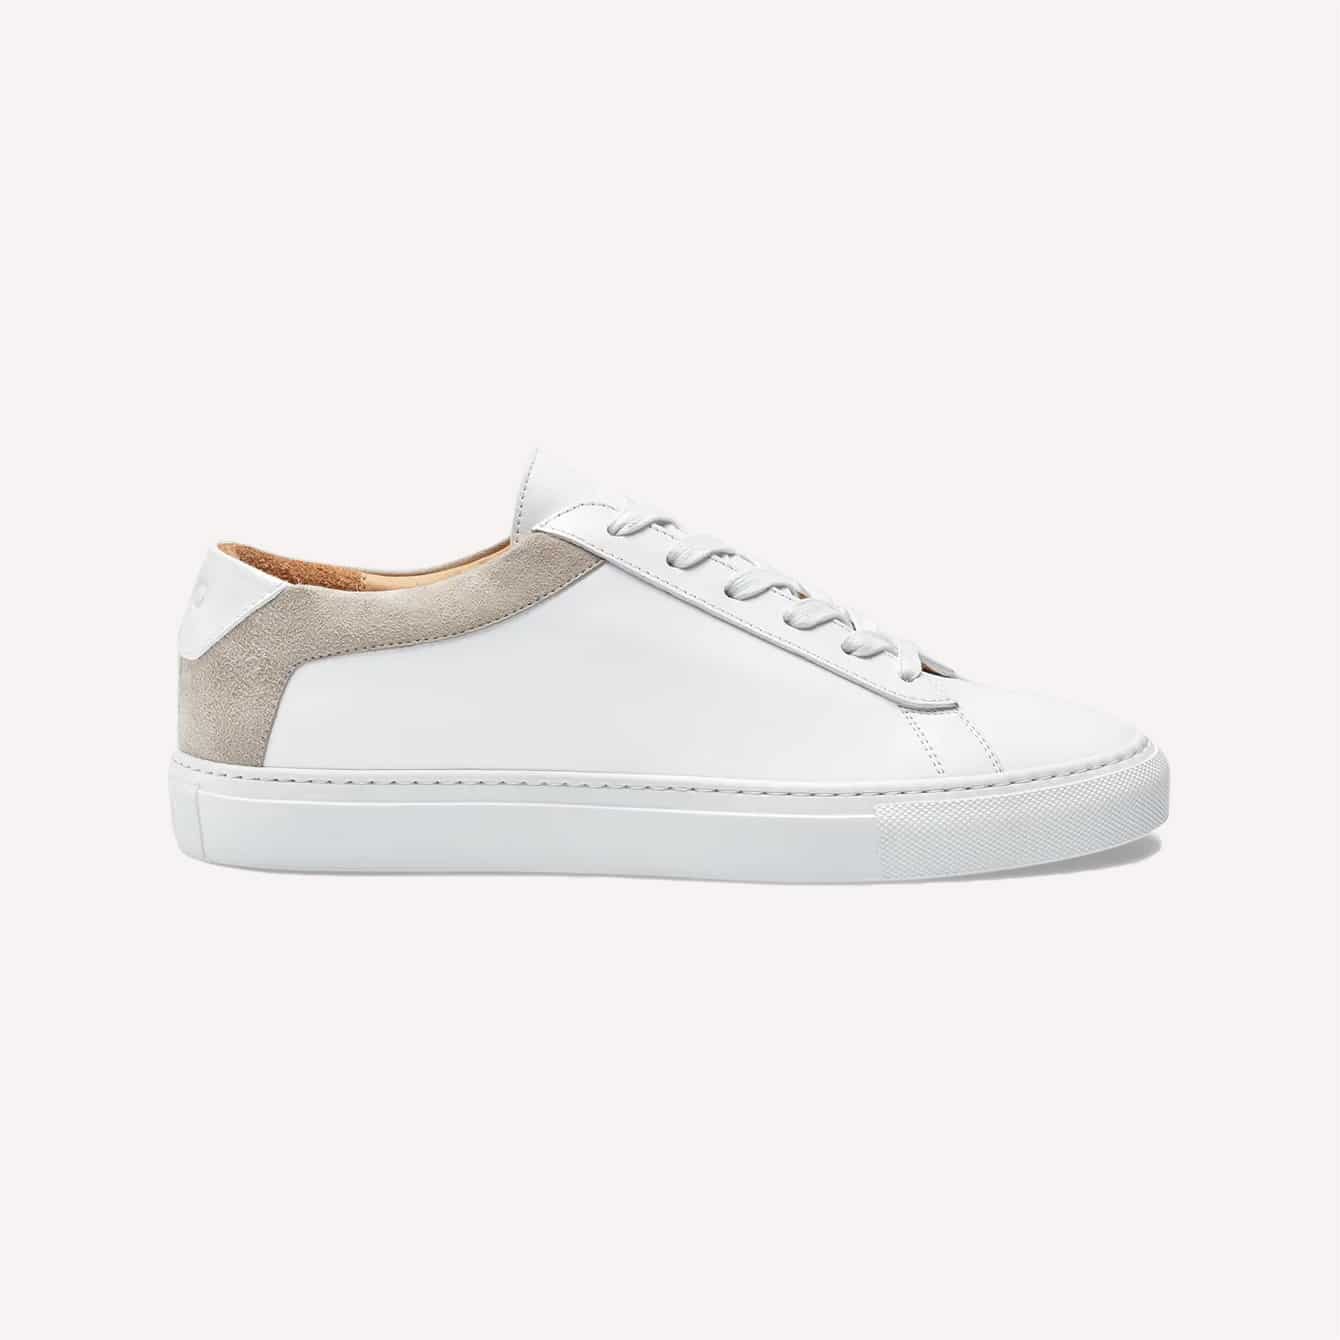 17 Best Common Projects Alternatives